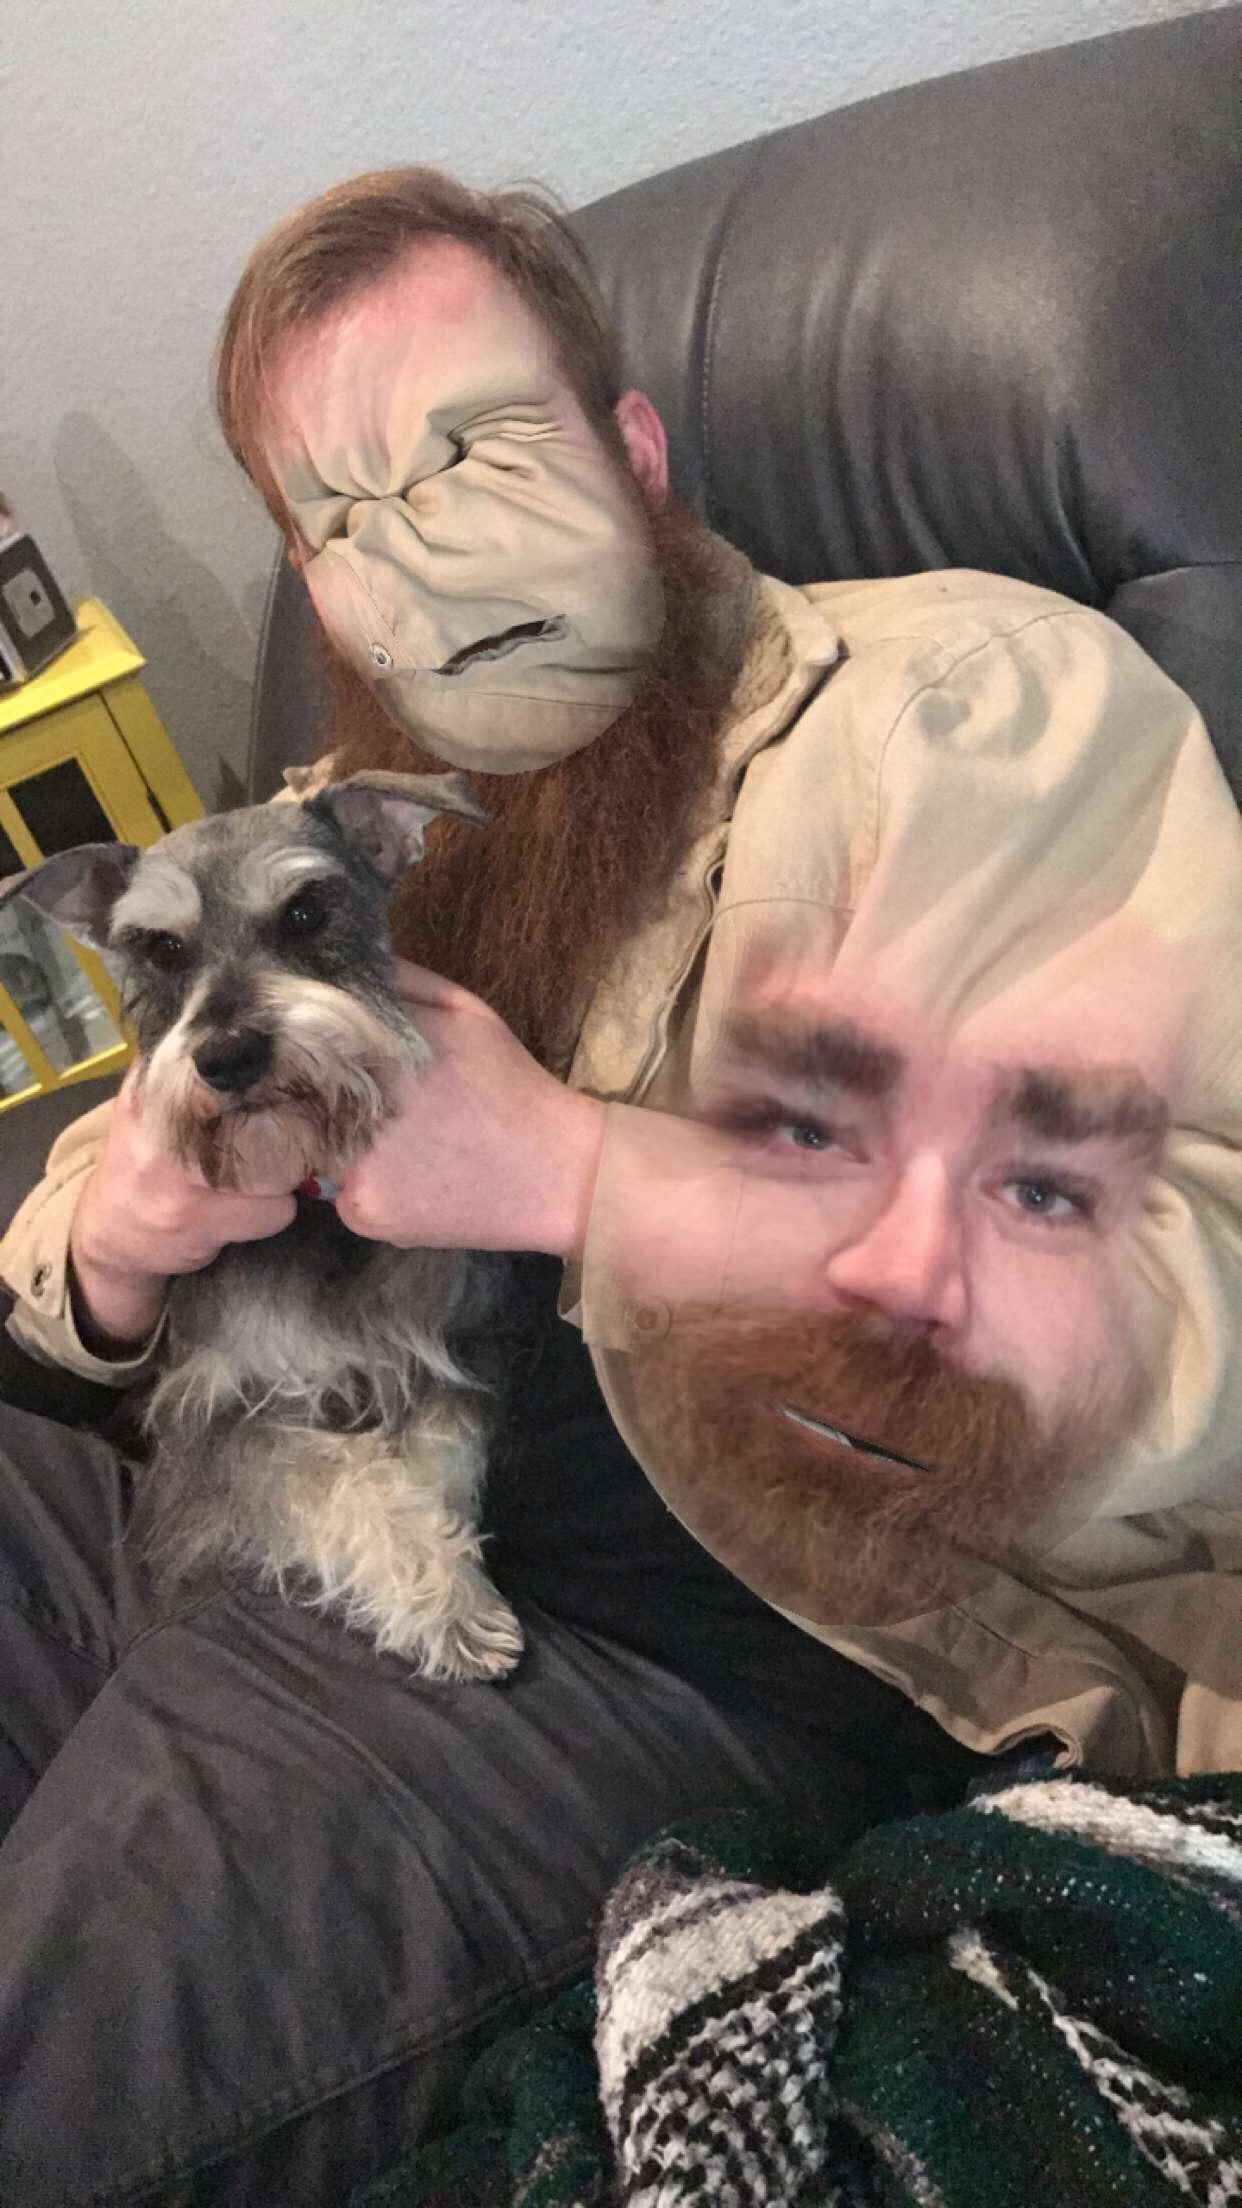 Attempted a faceswap with my dog but ...